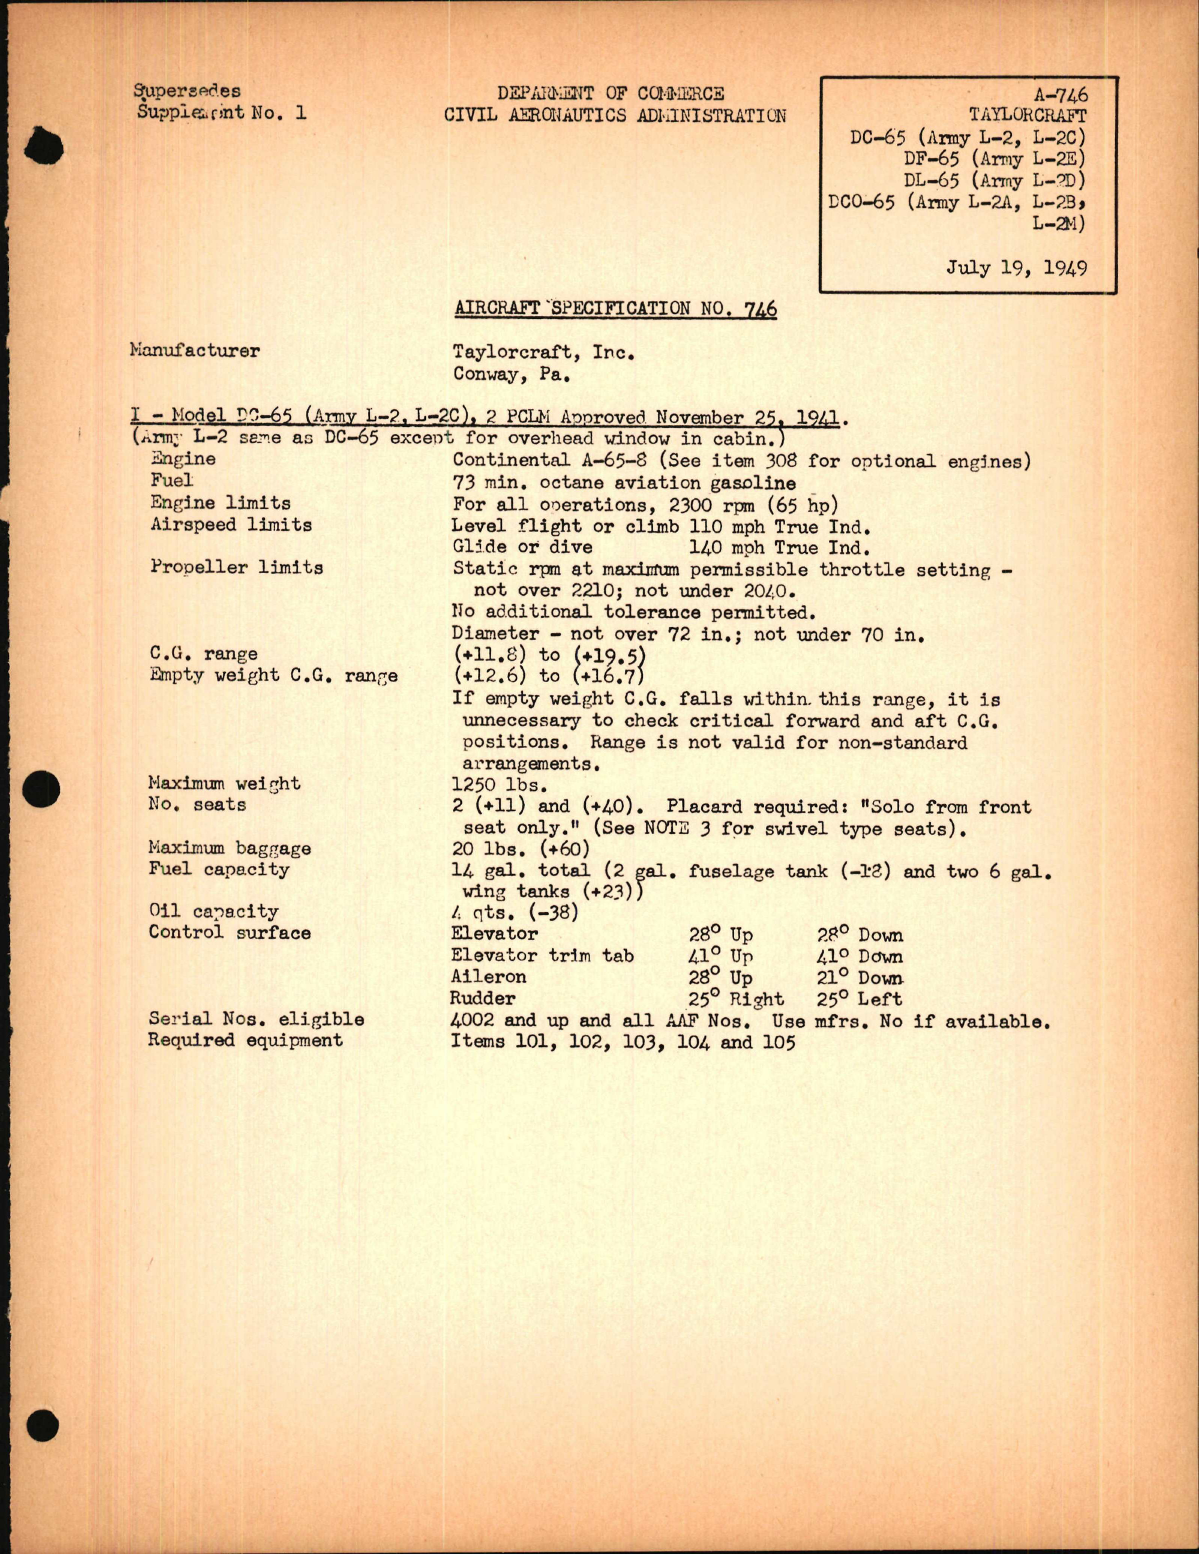 Sample page 1 from AirCorps Library document: DC-65, DF-65, DL-65, and L-2 Series